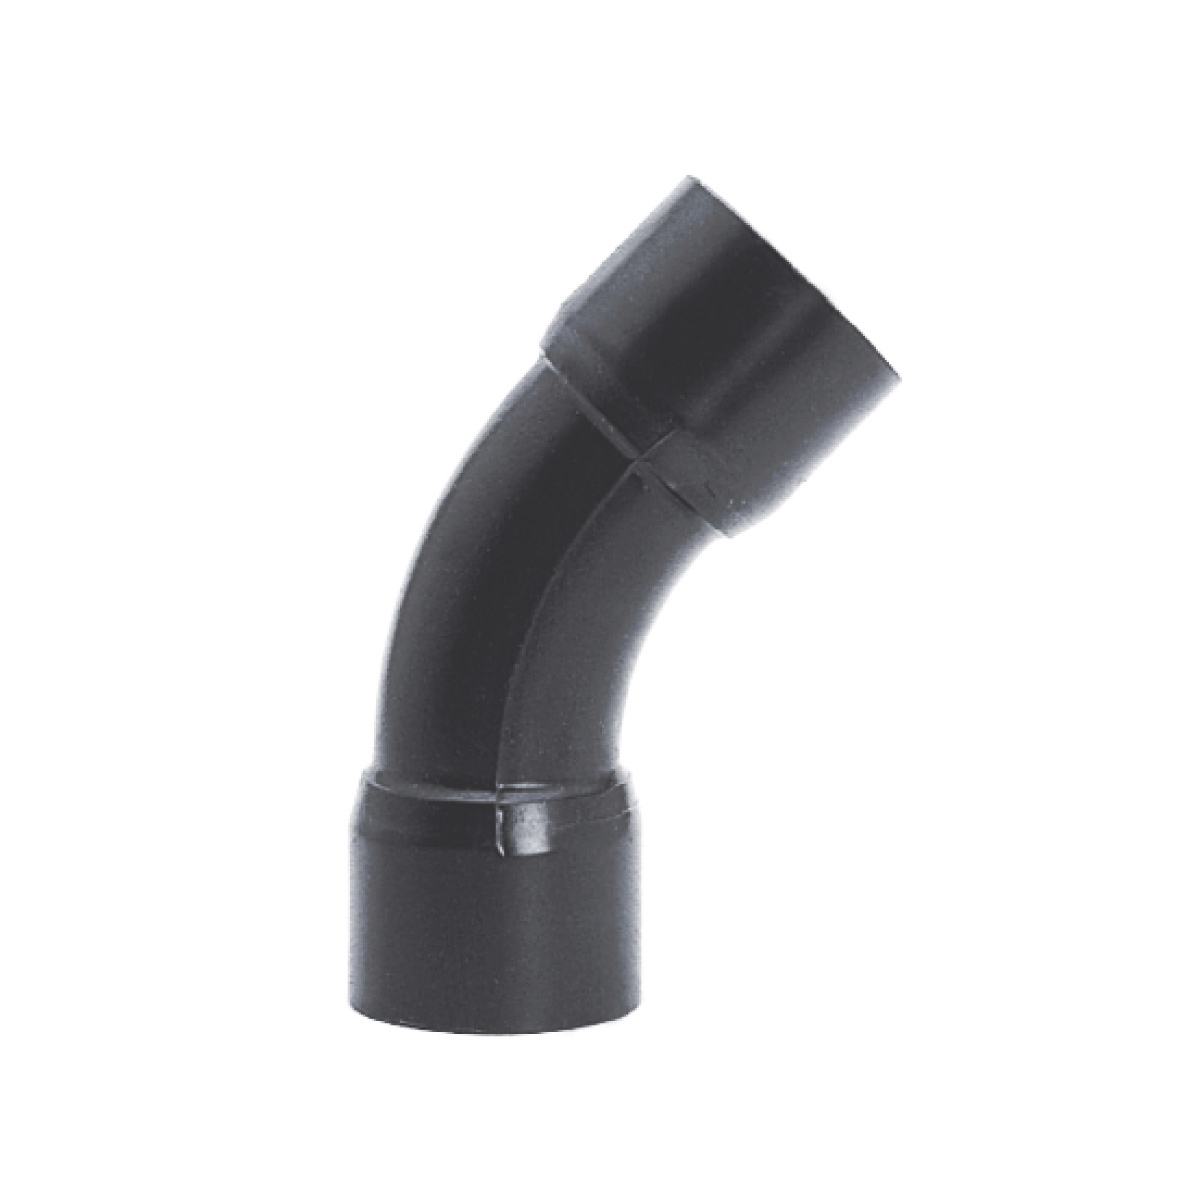 IBG® bend 45° solvent socket, made of PVC pipe, grey d32 IBG® bend 45° solvent socket, made of PVC pipe, grey d32